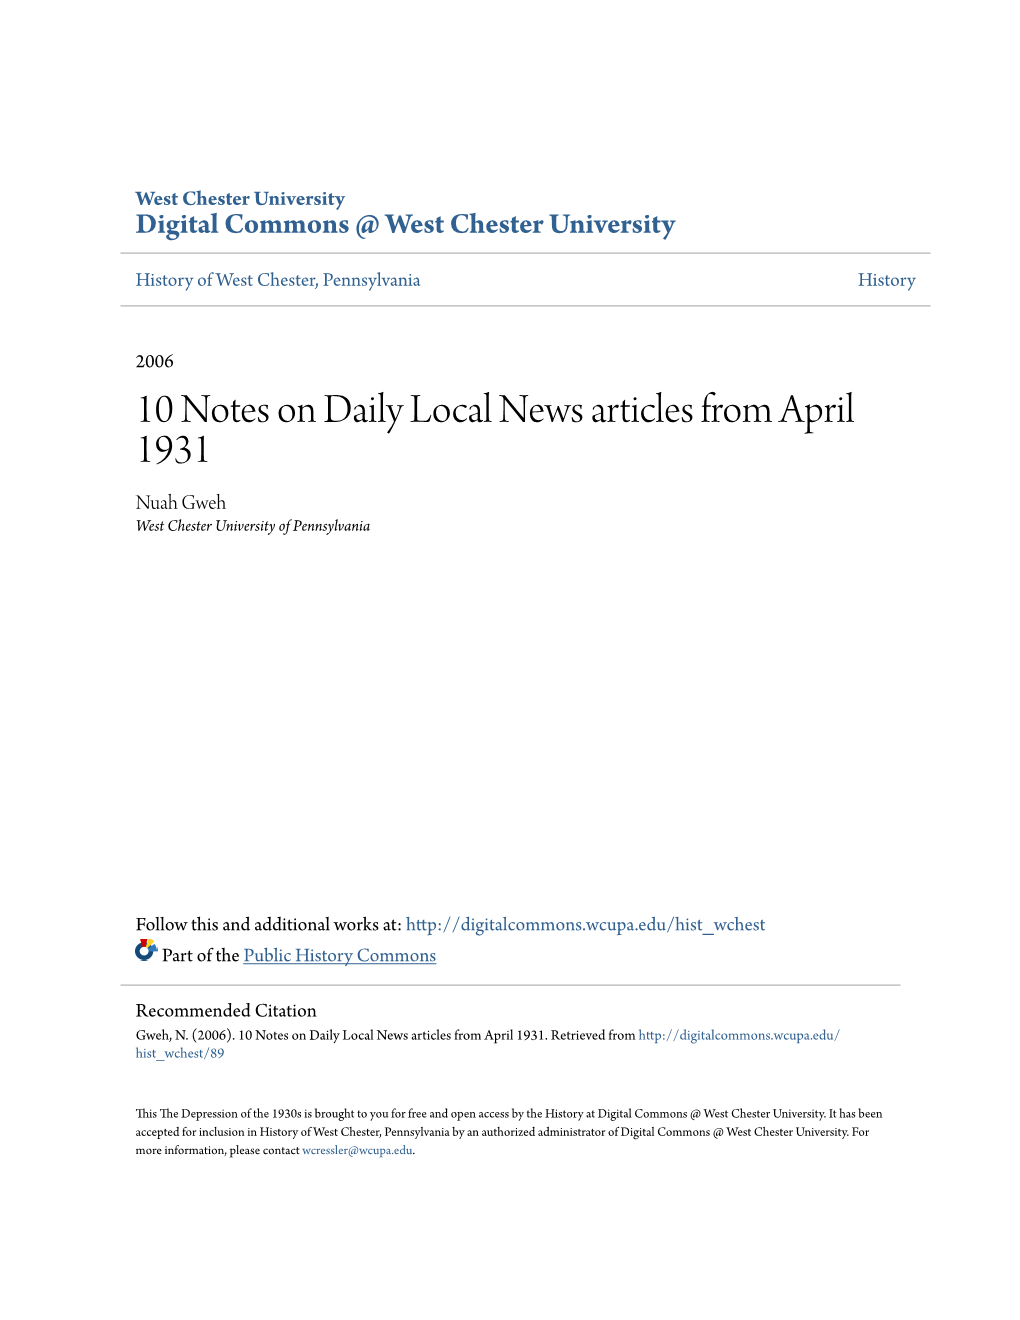 10 Notes on Daily Local News Articles from April 1931 Nuah Gweh West Chester University of Pennsylvania